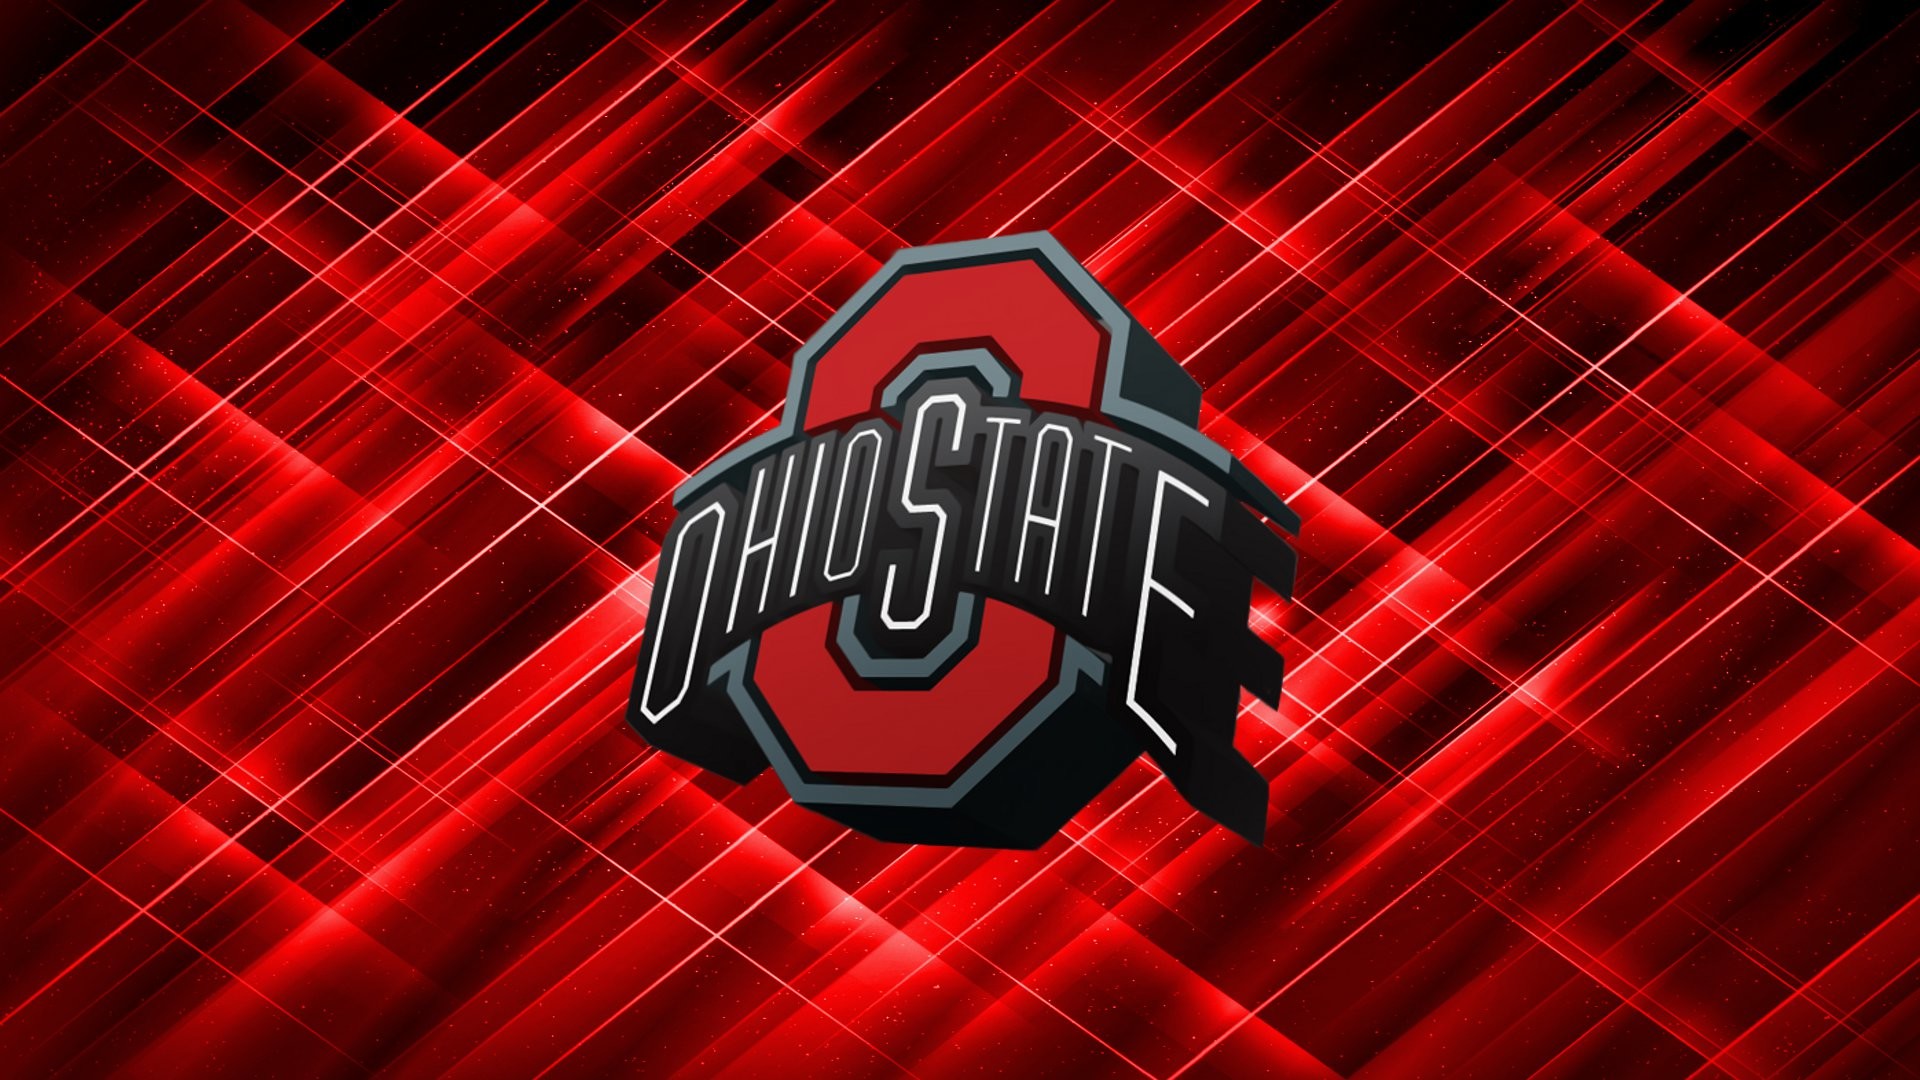 1920x1080 Ohio State Football images OSU Wallpaper 12. HD wallpaper and .